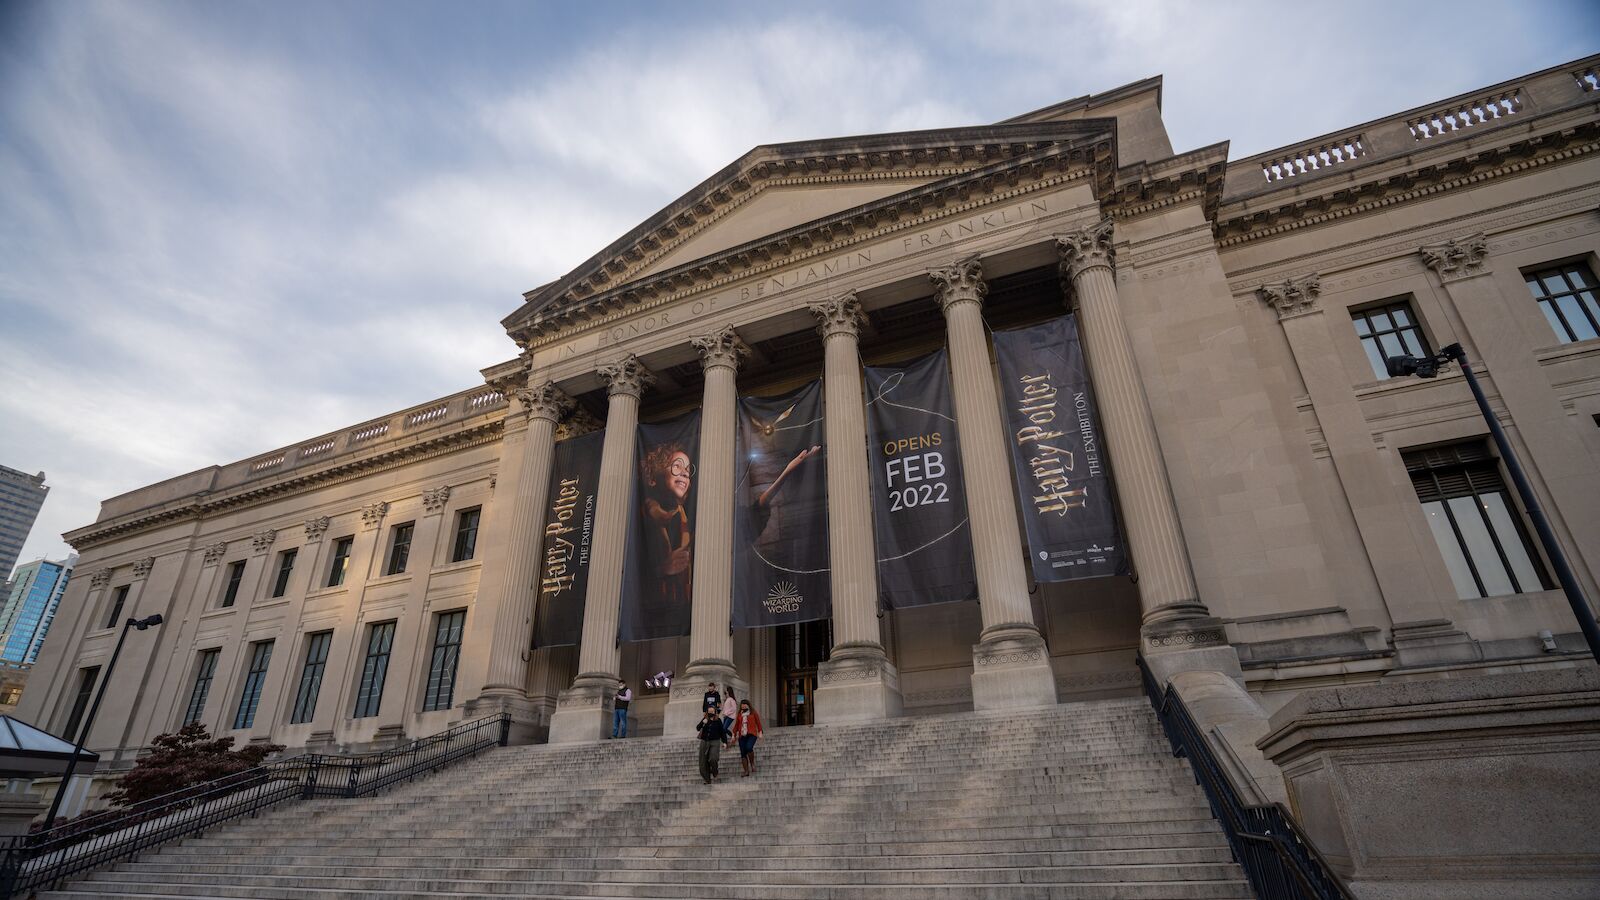 Facade of the Franklin Institute in Philadelphia where the "Harry Potter: The Exhibition" is taking place